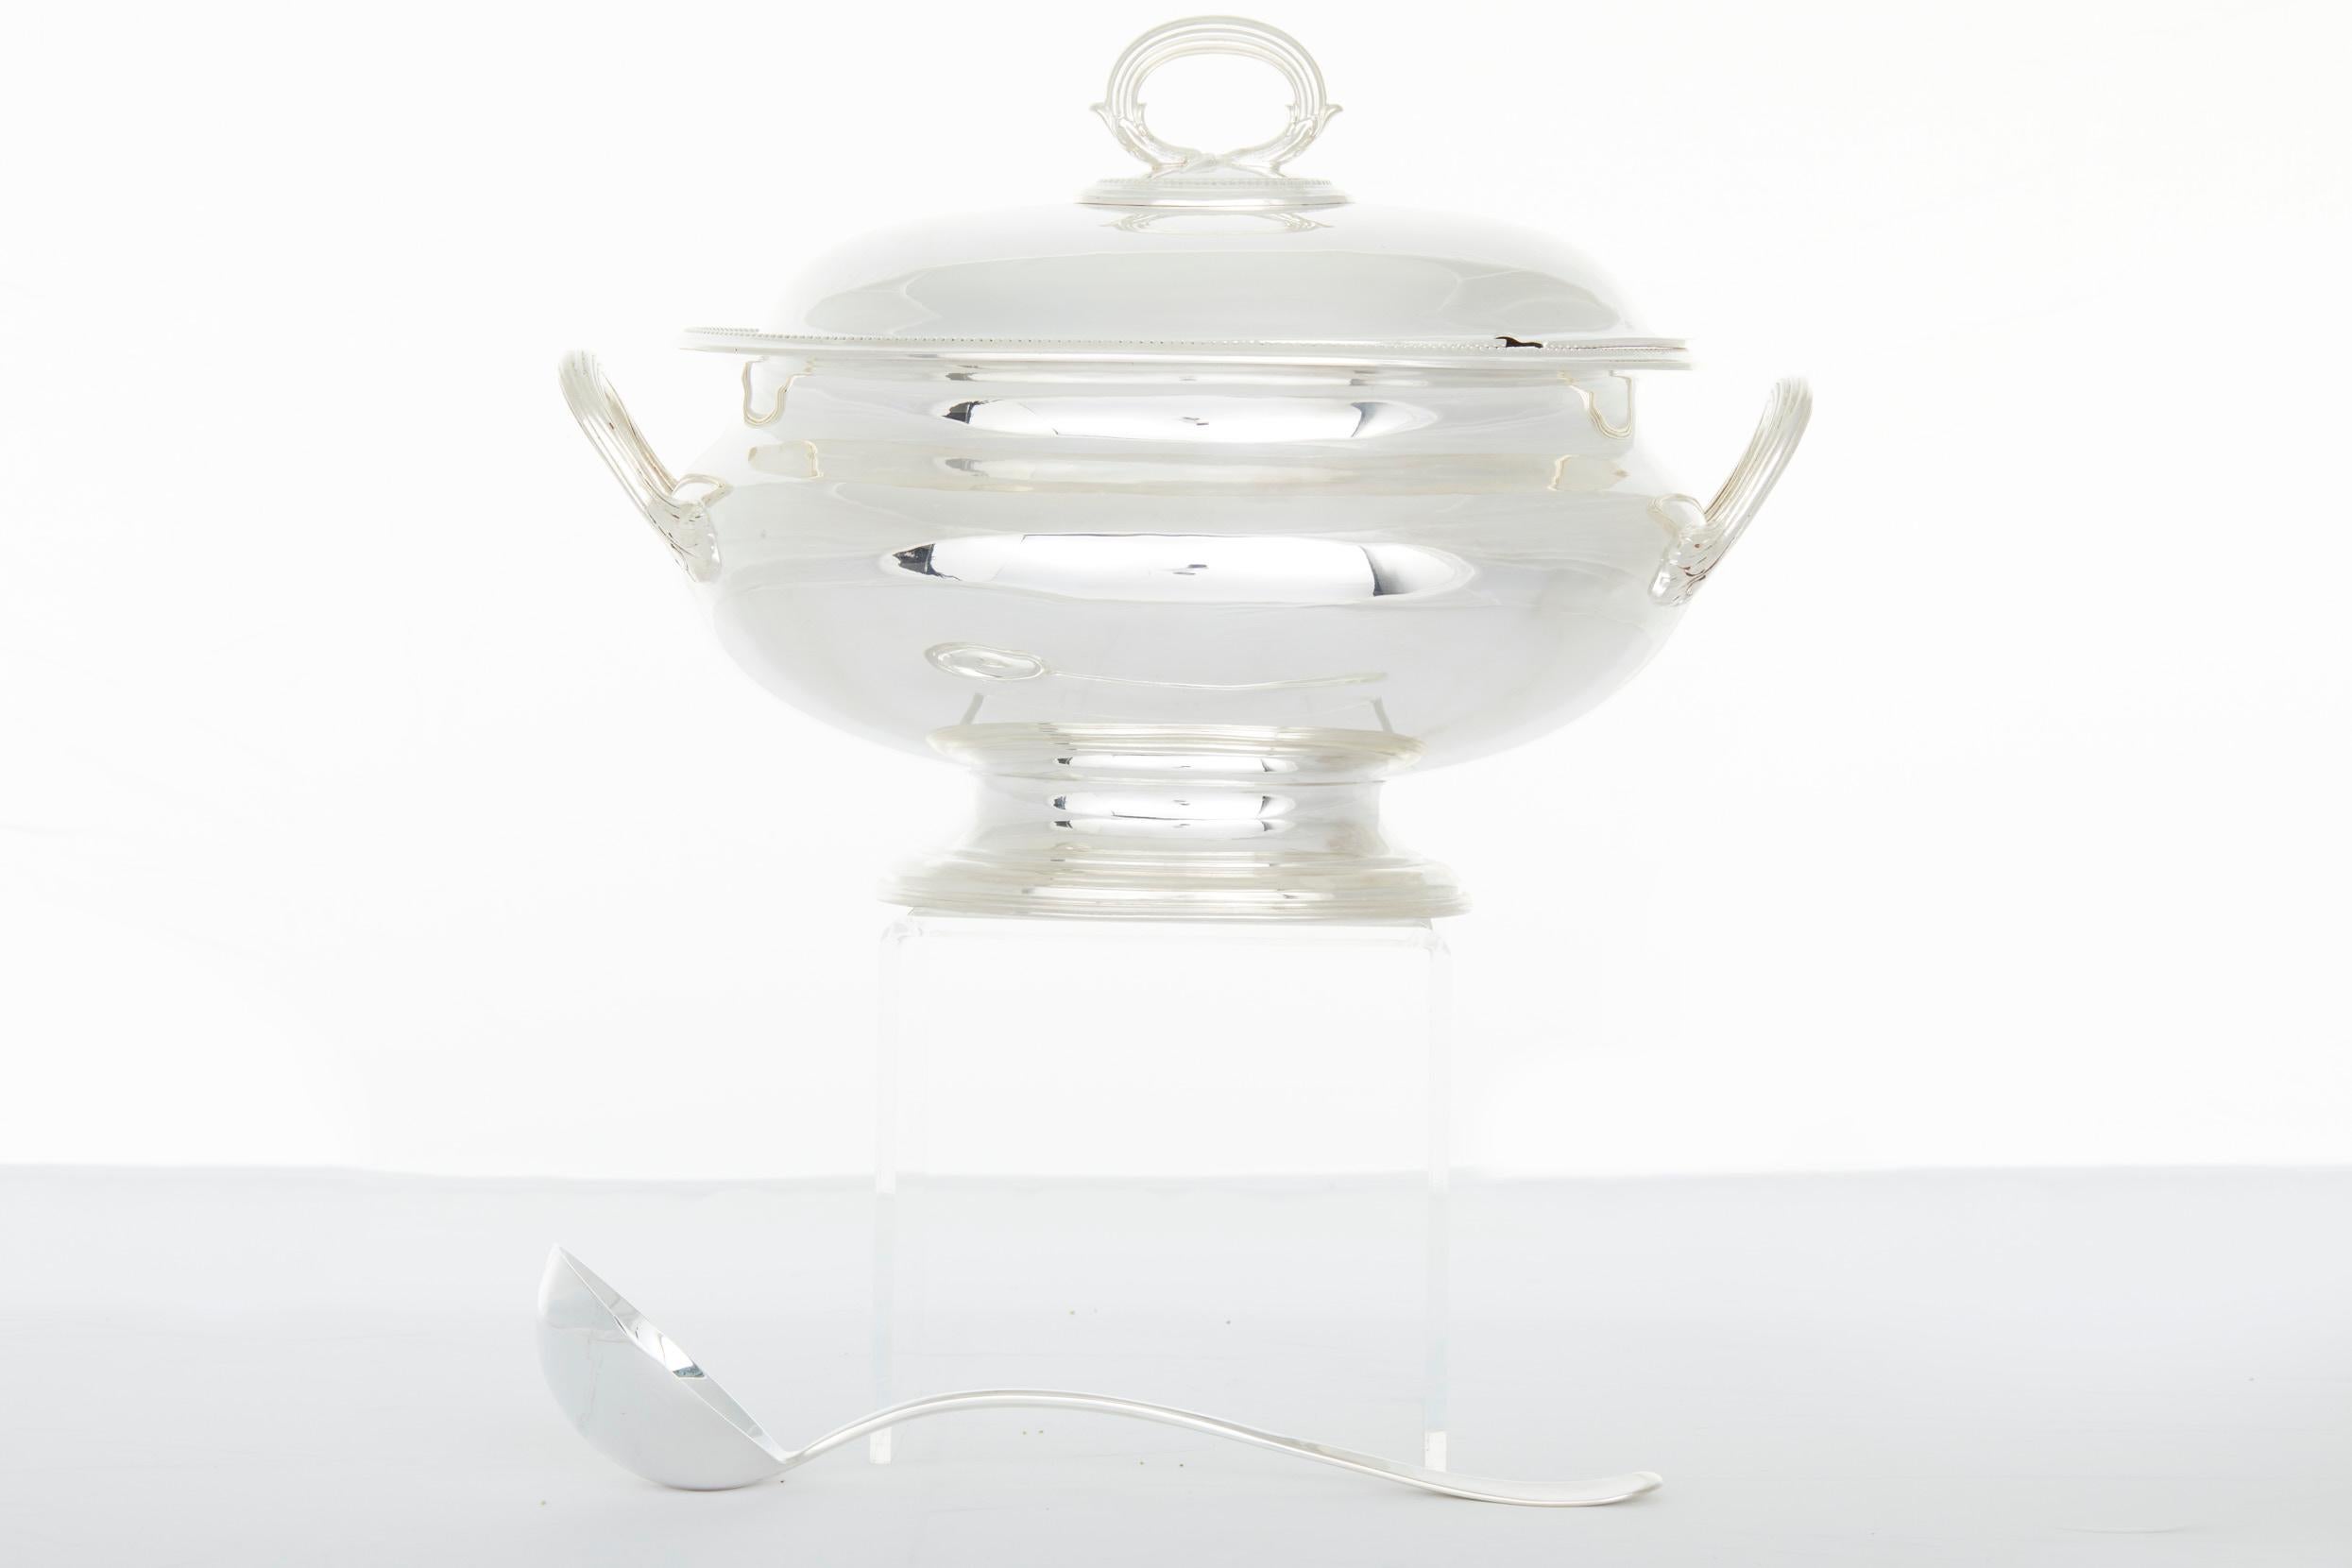 English silver plated tableware covered soup tureen / serving piece with two side handles and exterior top finial design details. The tureen is in great condition. Minor wear consistent with age / use. Maker's mark undersigned. The tureen stands